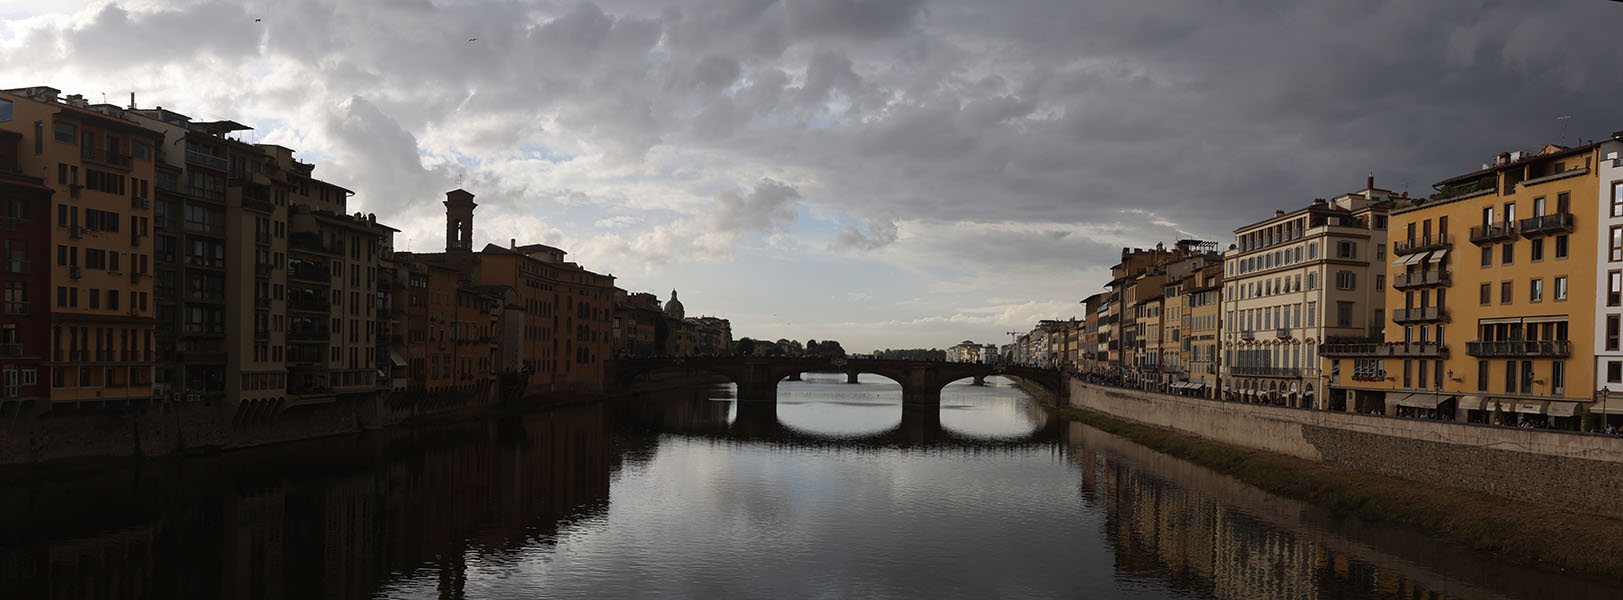 Panoramic Photo of the Arno in Florence with Bridges, Buildings, and Beautiful Sky and Water.